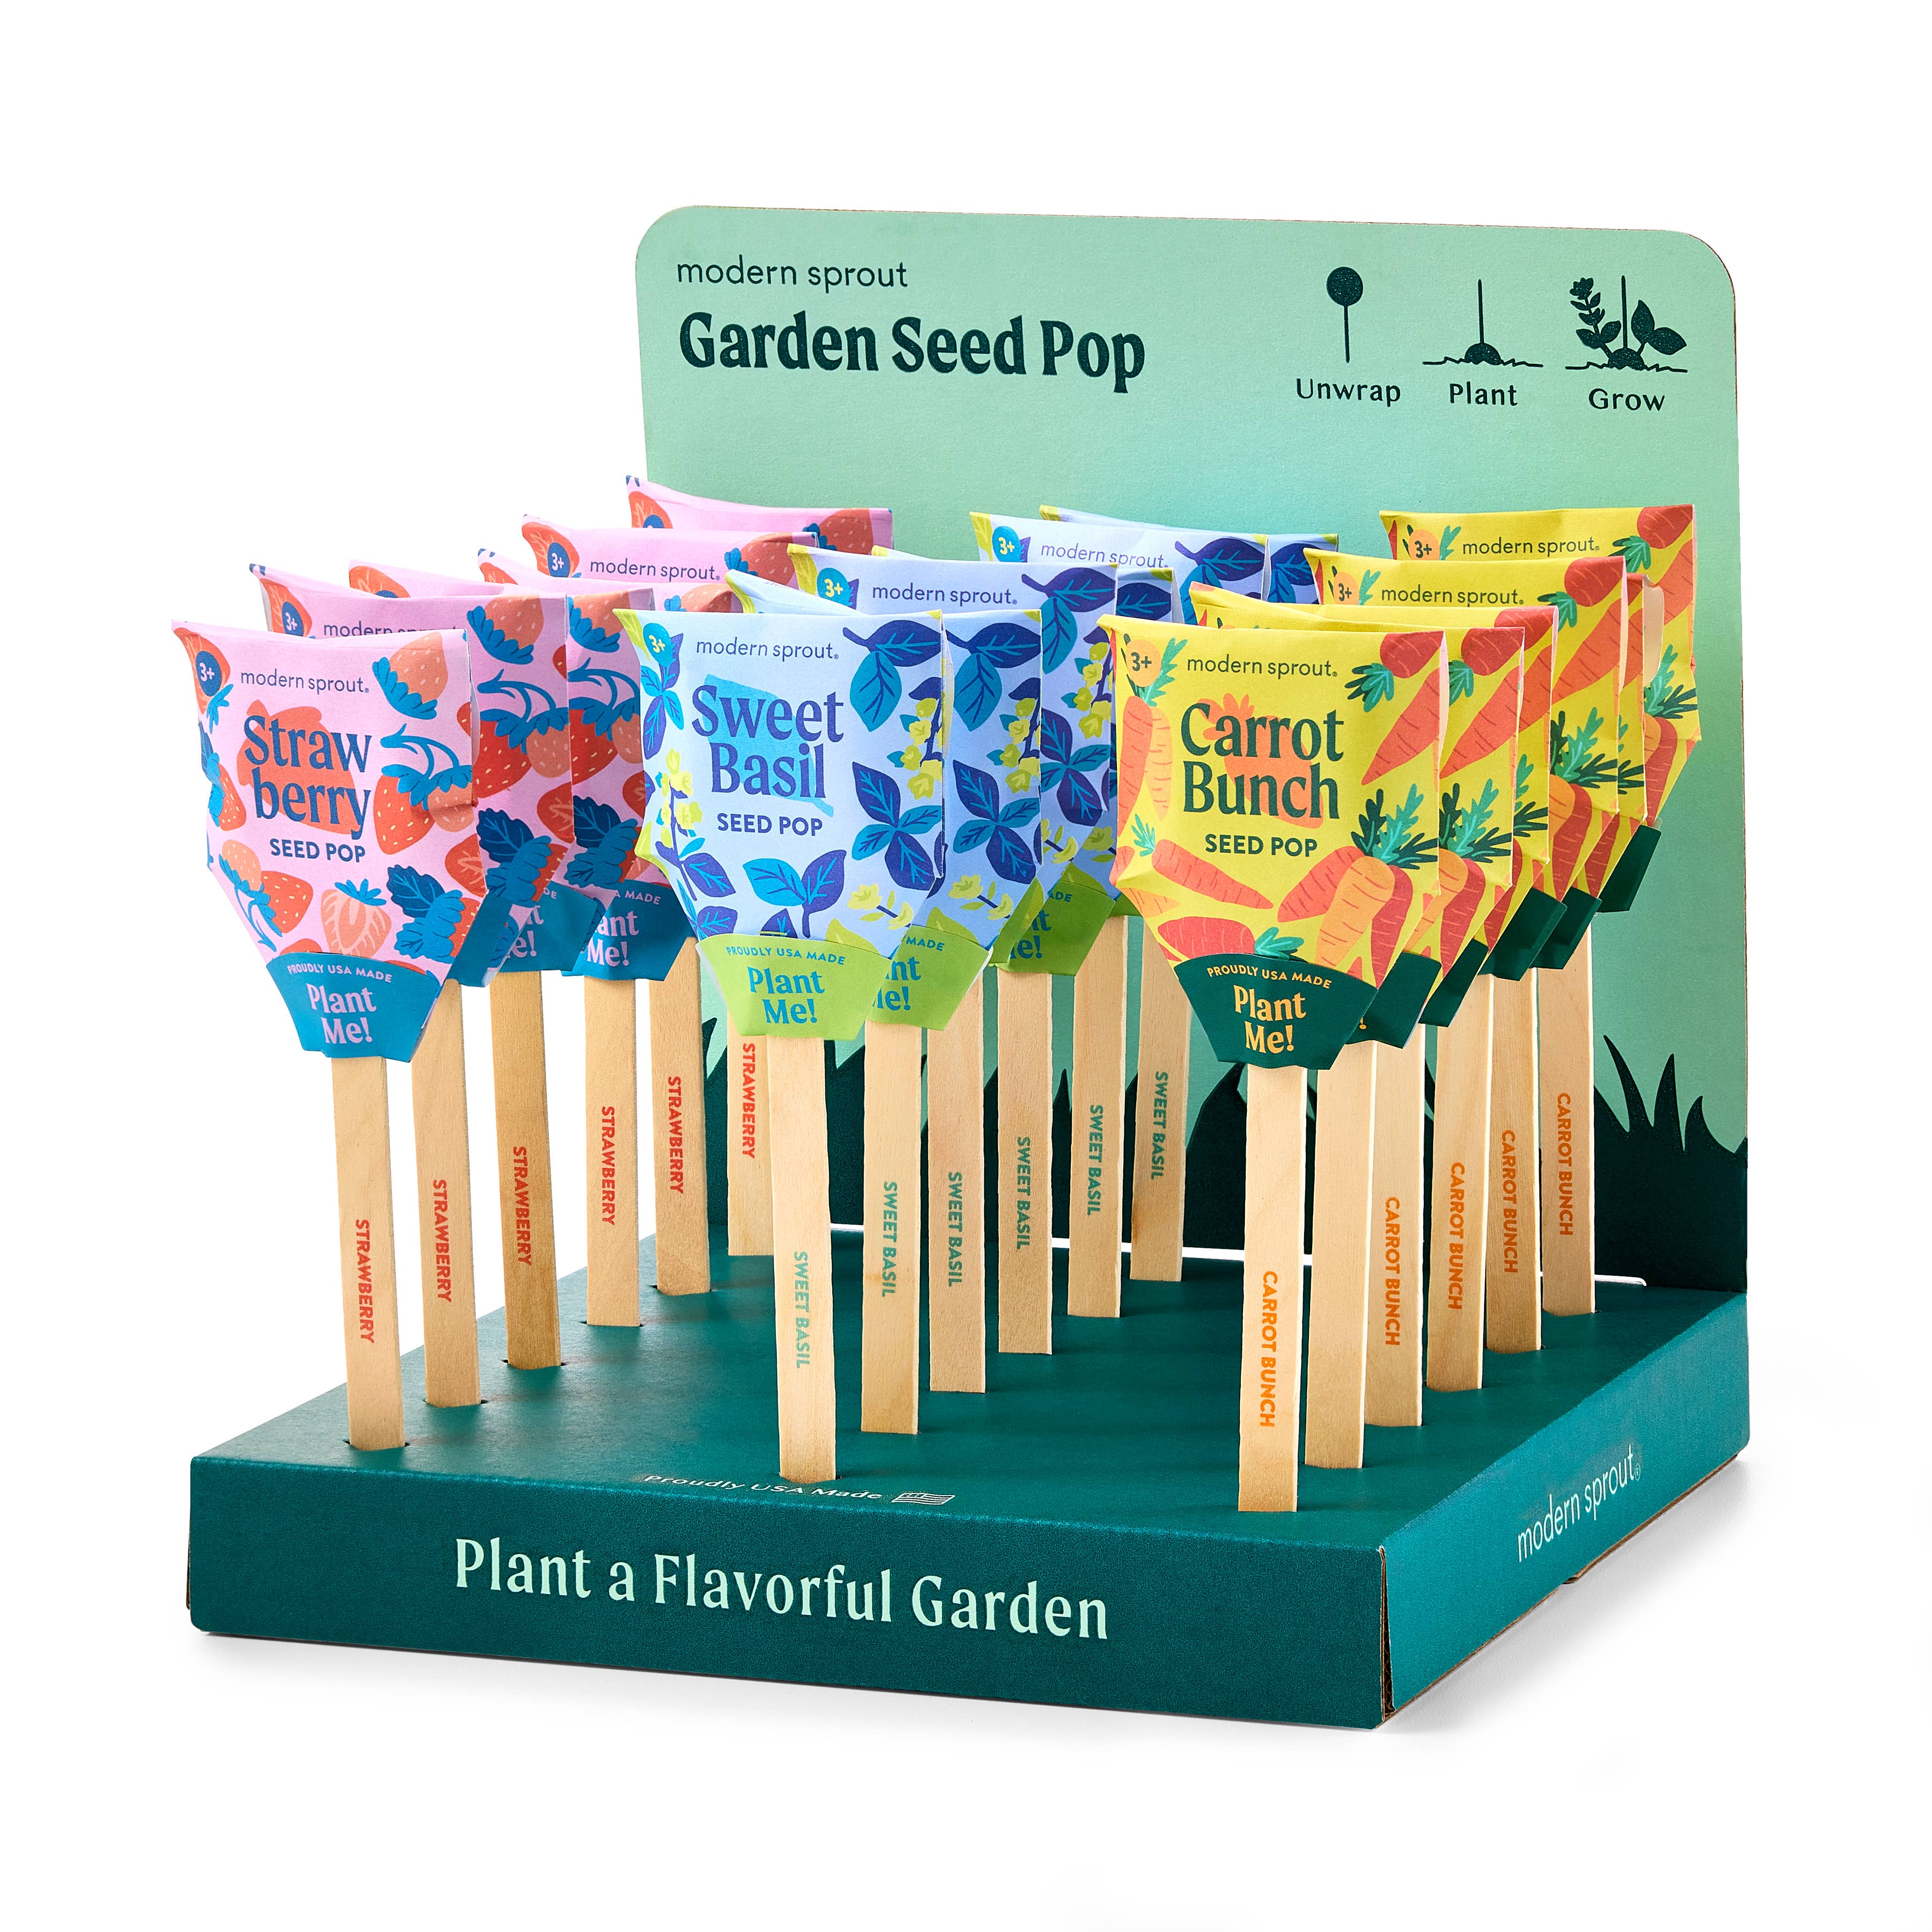 Wholesale NEW Garden Seed Pops - 18 Pk + Display for your store